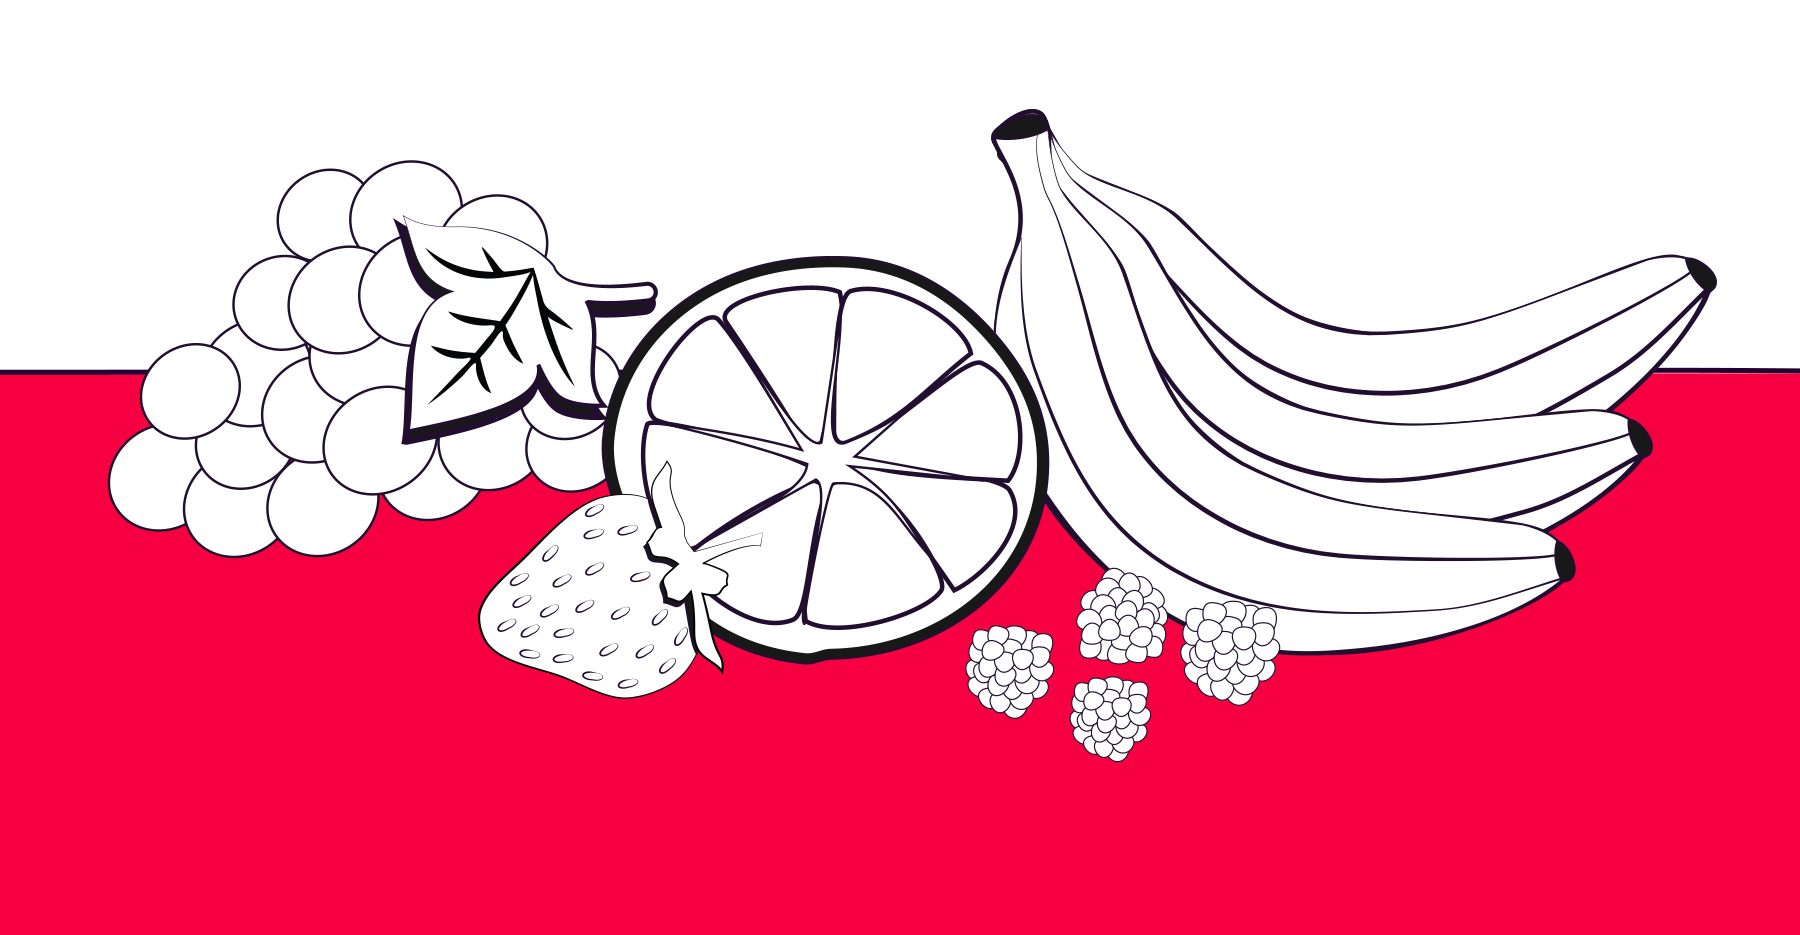 An illustration of some fruit like bananas, grapes and strawberries on a red background